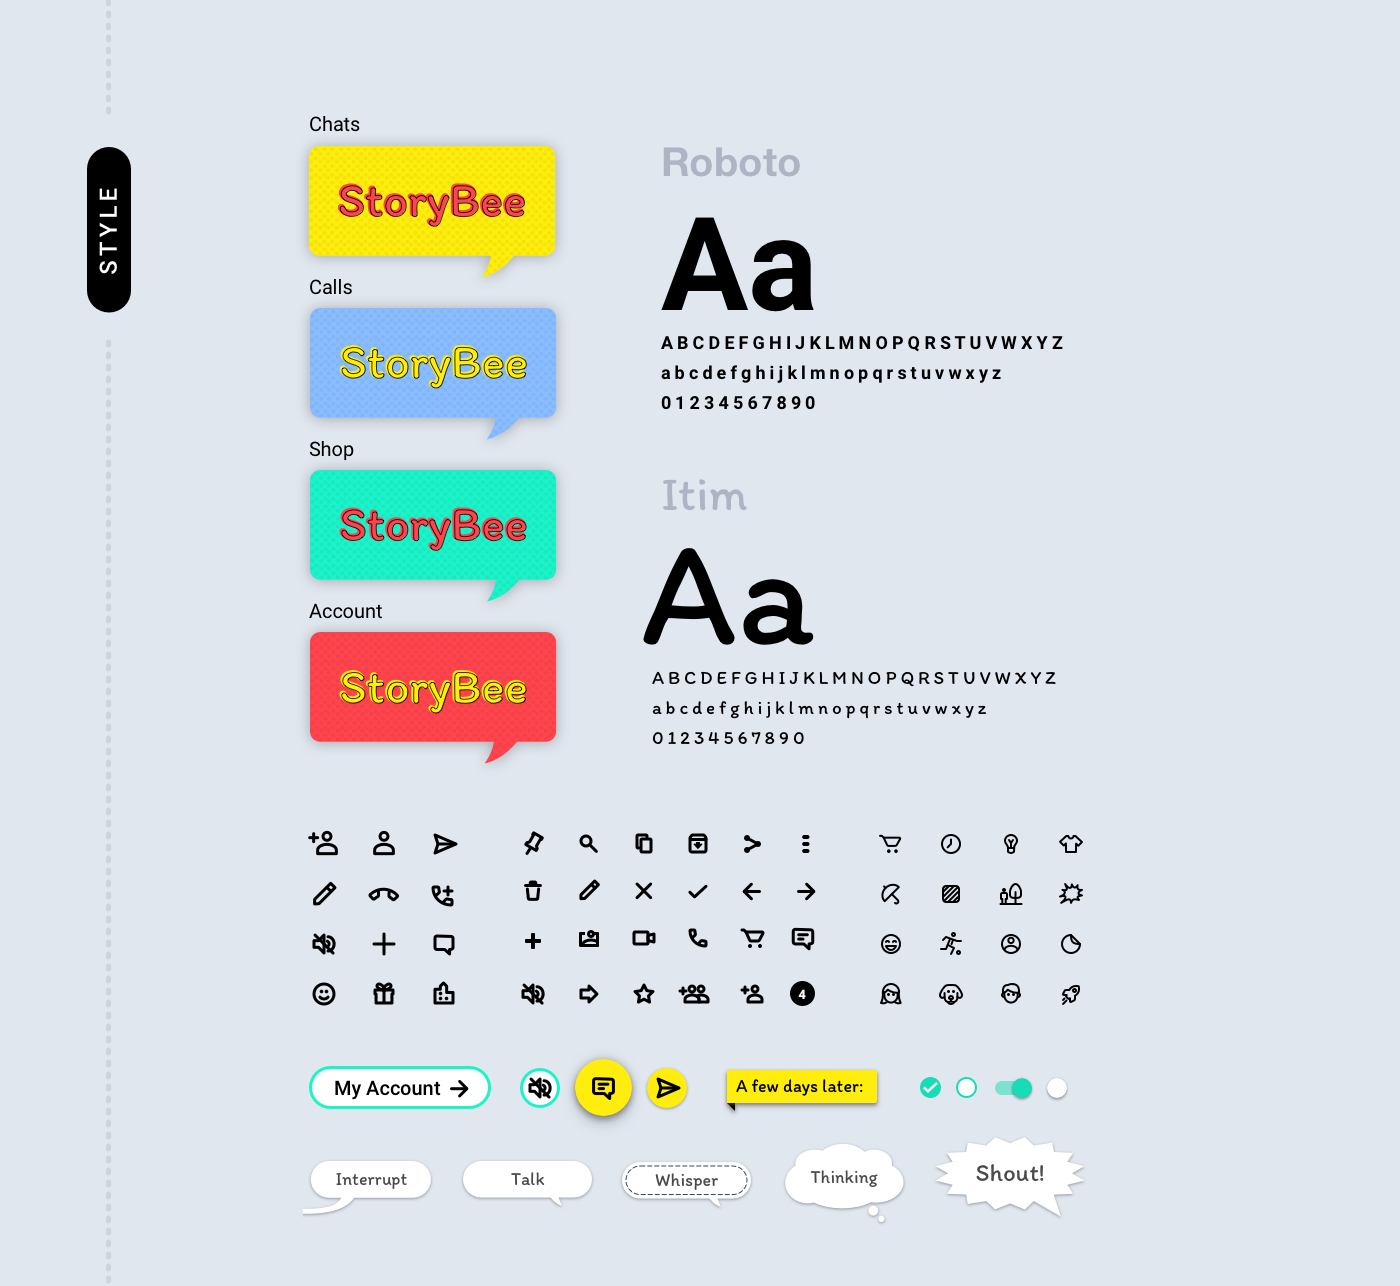 StoryBee font, colours, icons | Storybee Schriftarten, Farben, Icons